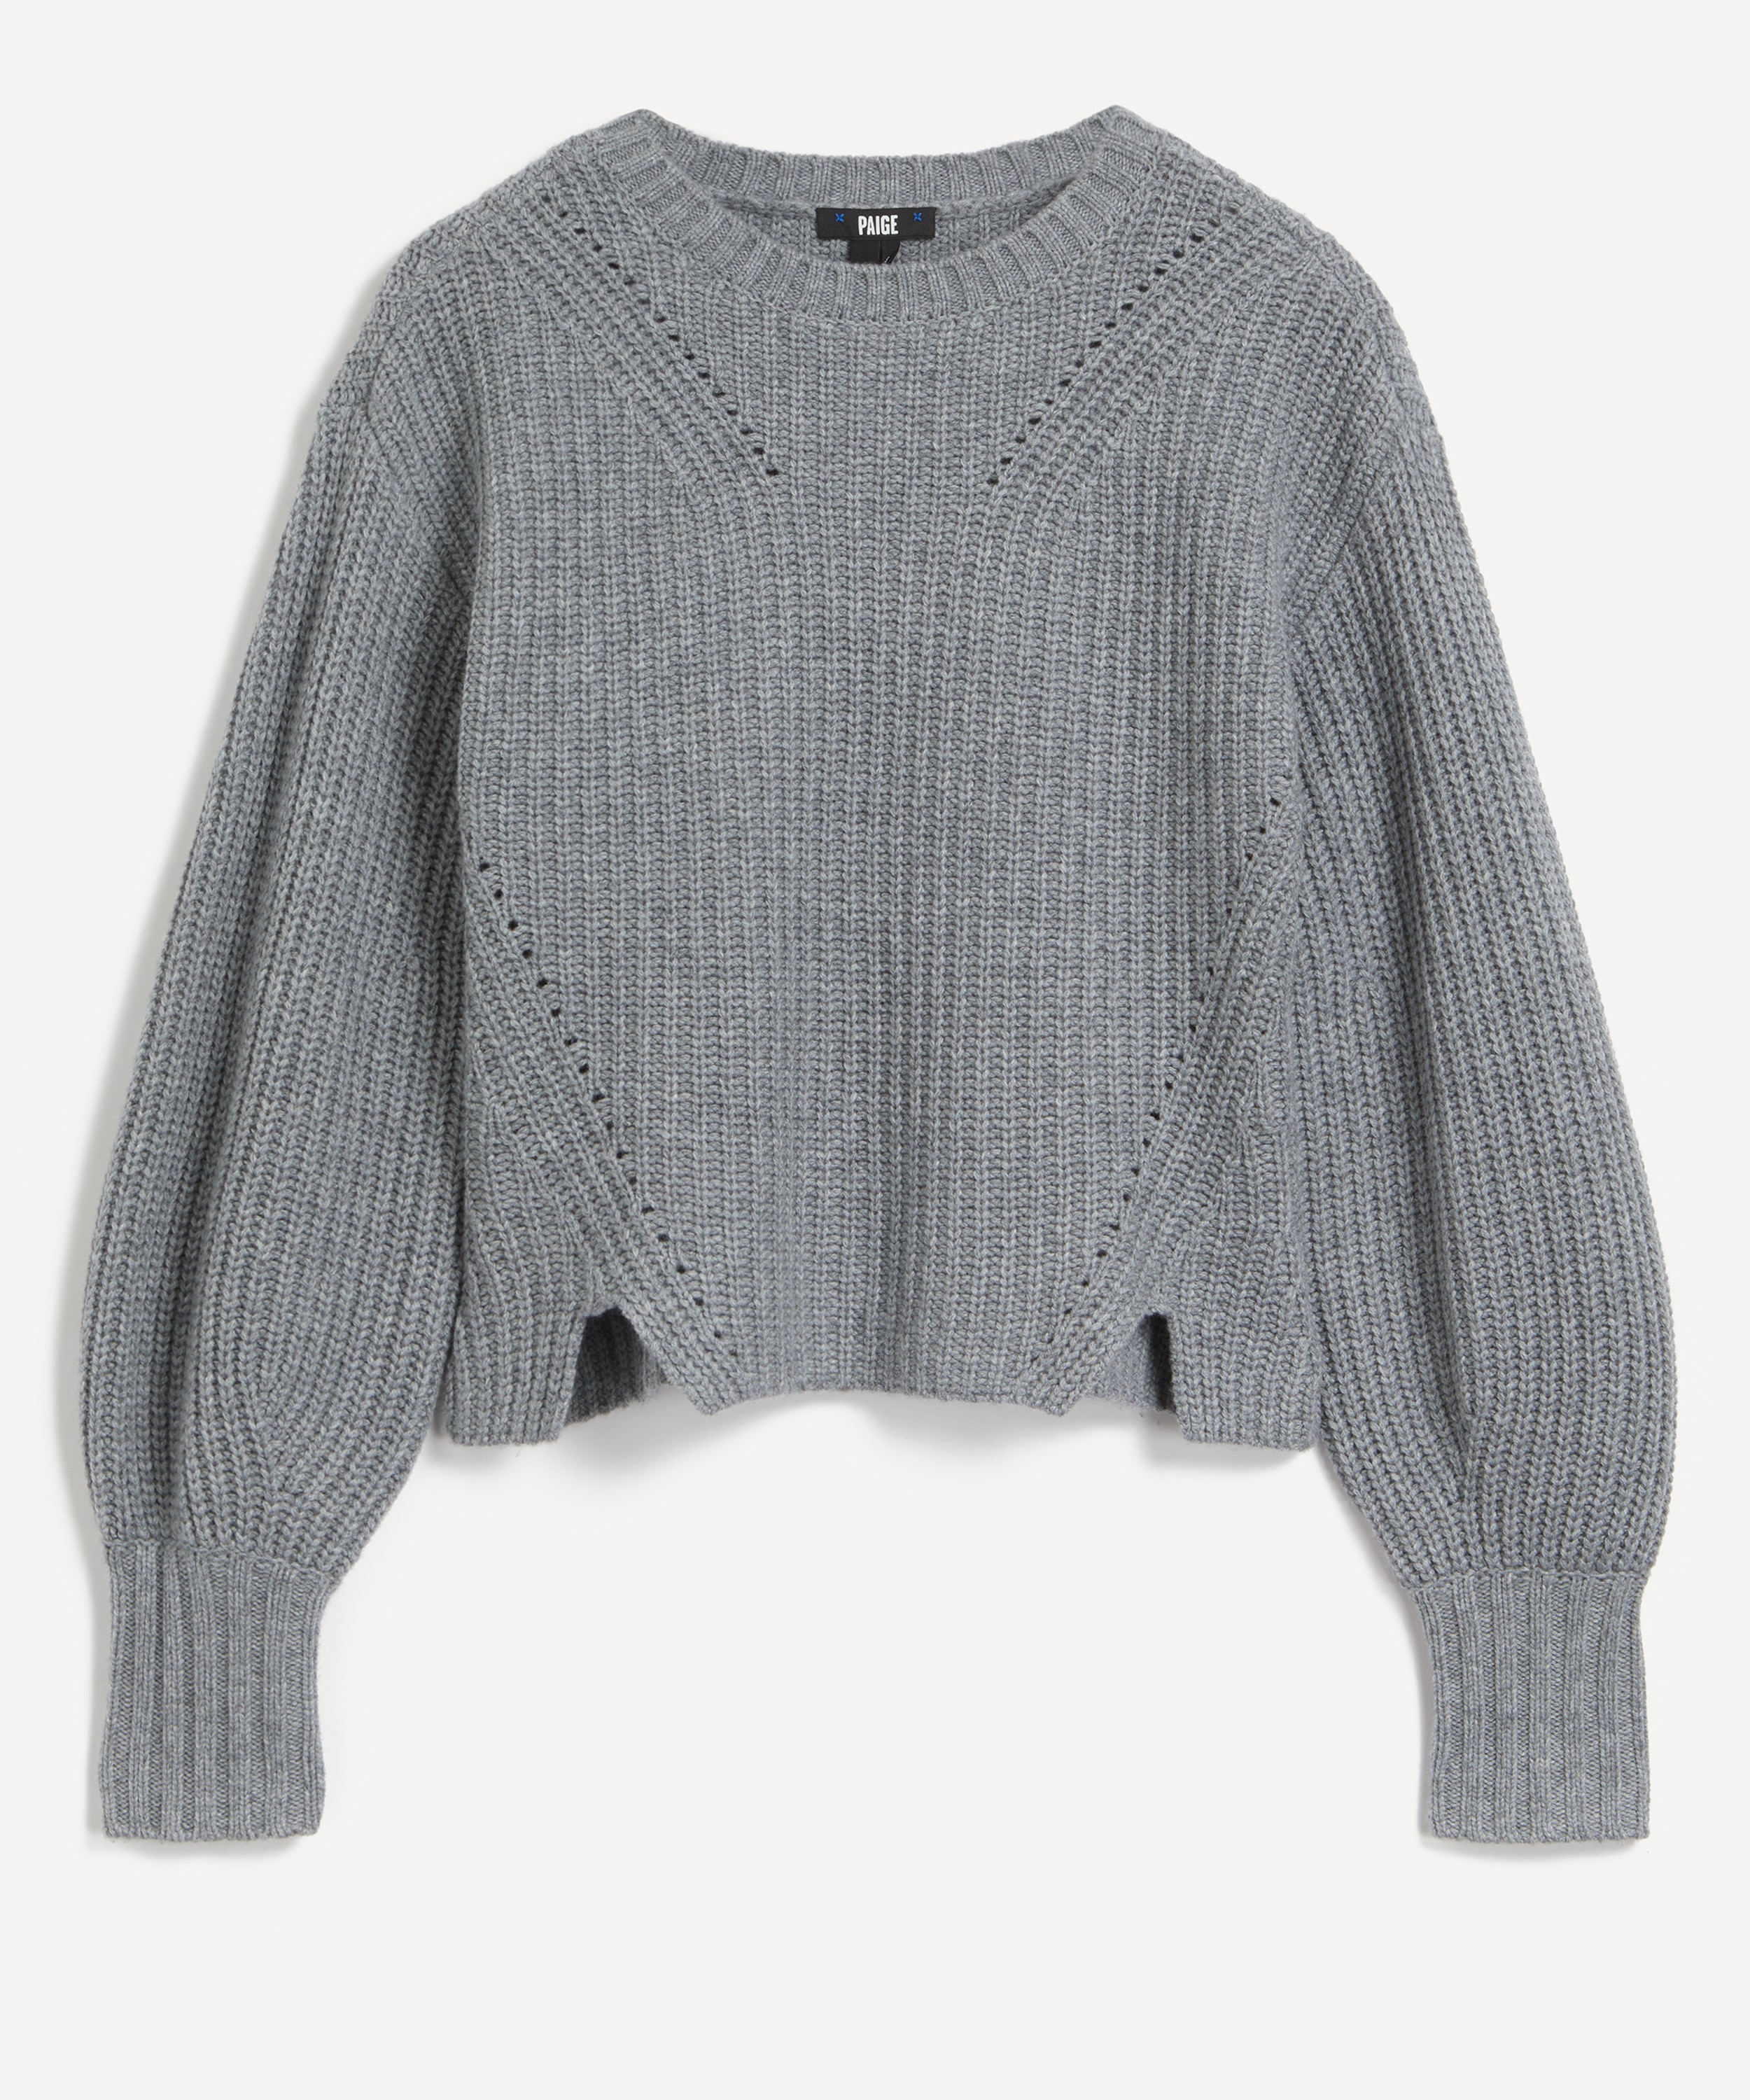 Paige - Palomi Wool Blend Knit Jumper image number null